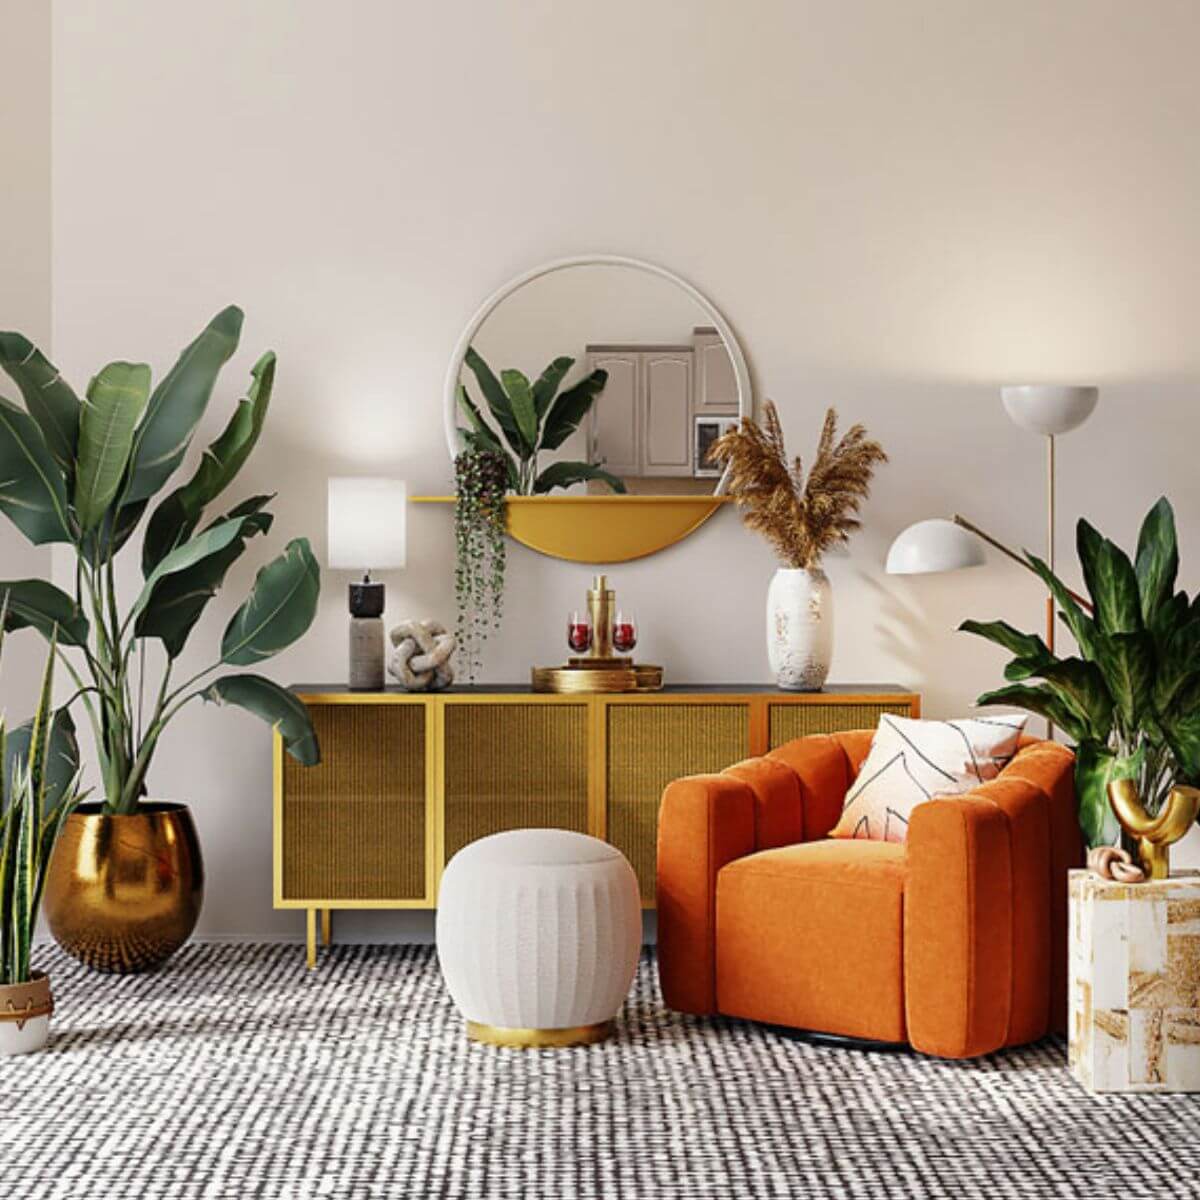 a living room with an orange chair, ottoman and potted plants